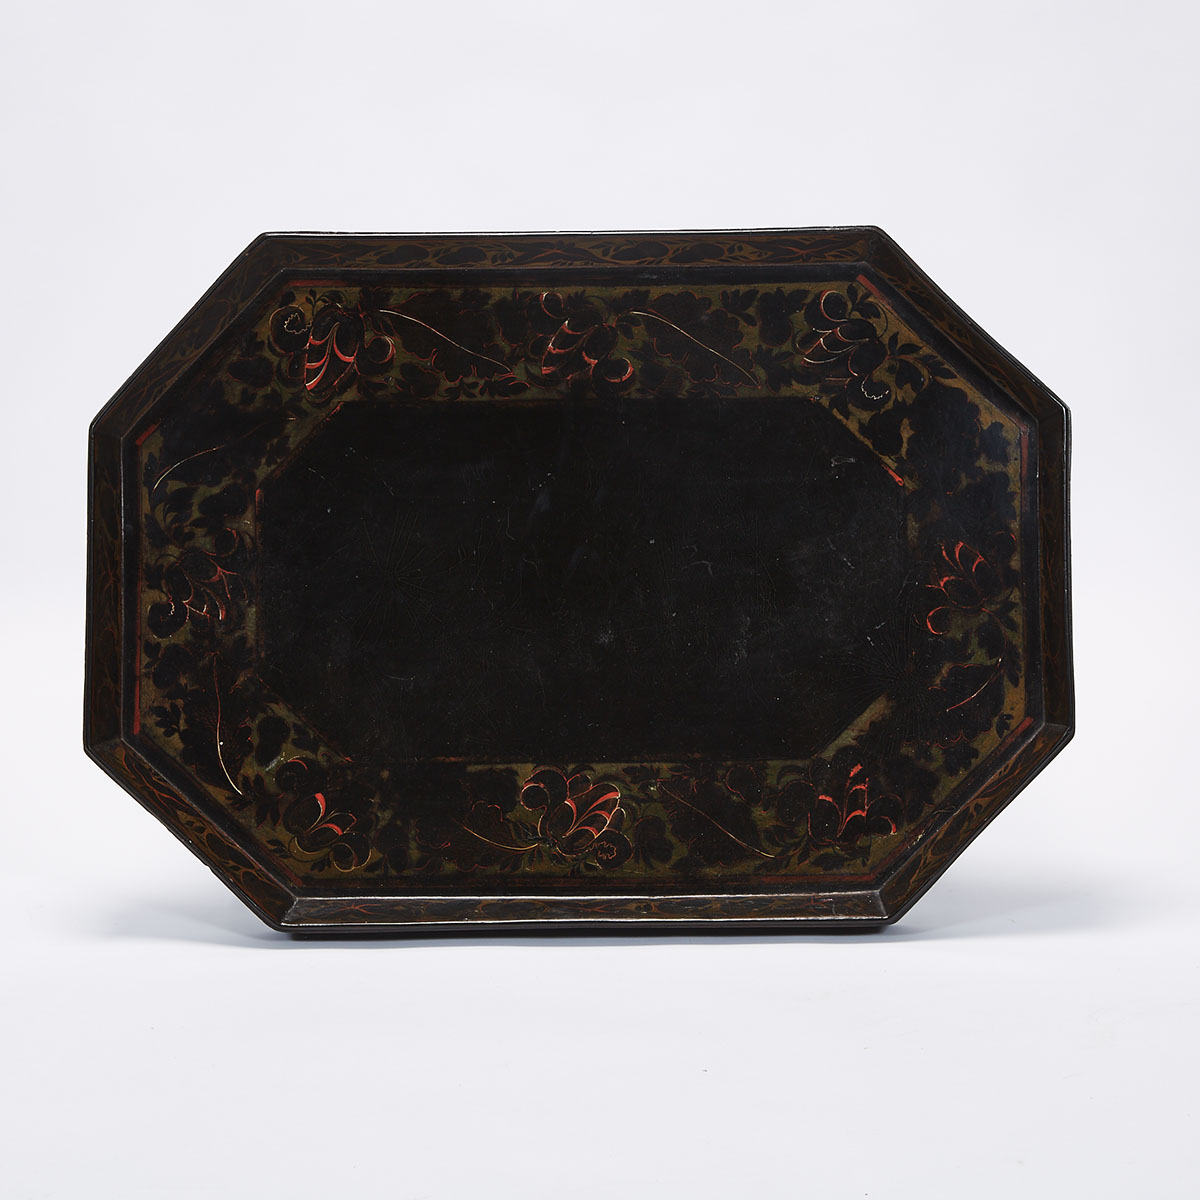 Victorian Painted Papier Maché Tea Tray, 19th century, on Later Stand